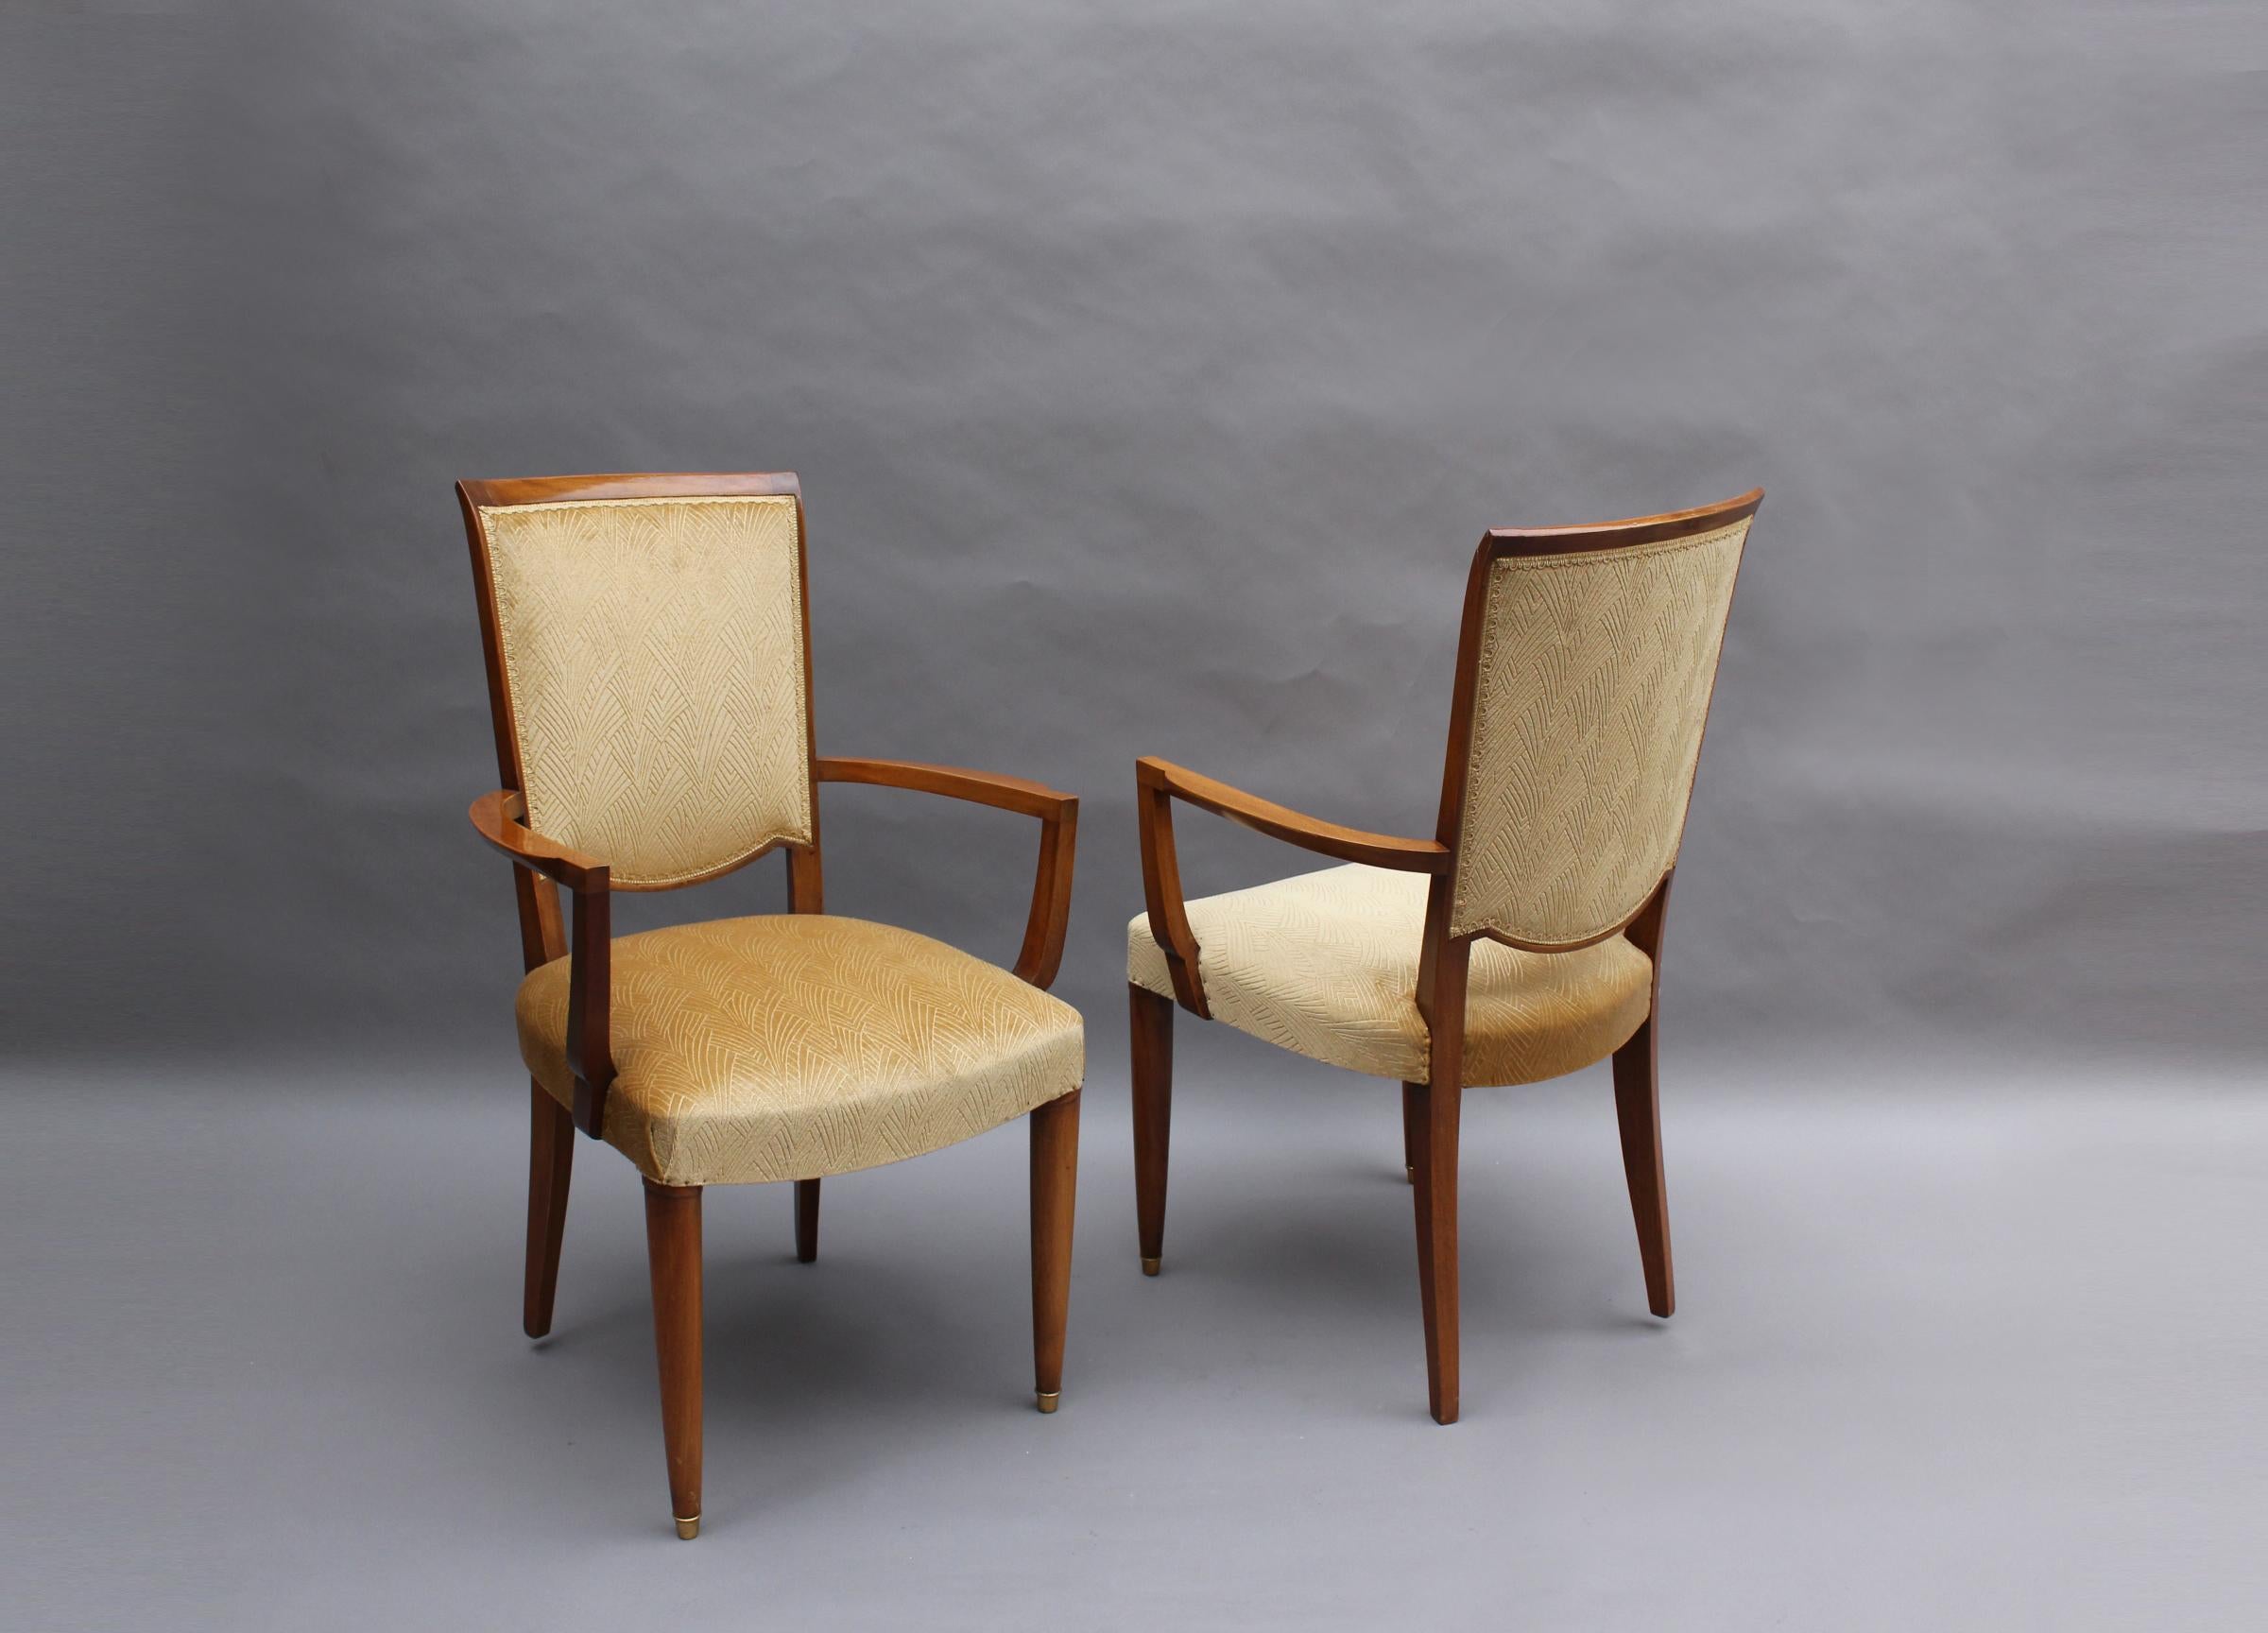 A Pair of fine French Art Deco mahogany bridge armchairs by Jules Leleu.
Price includes refinishing (satin - semi gloss finish). Re-upholstery not included.